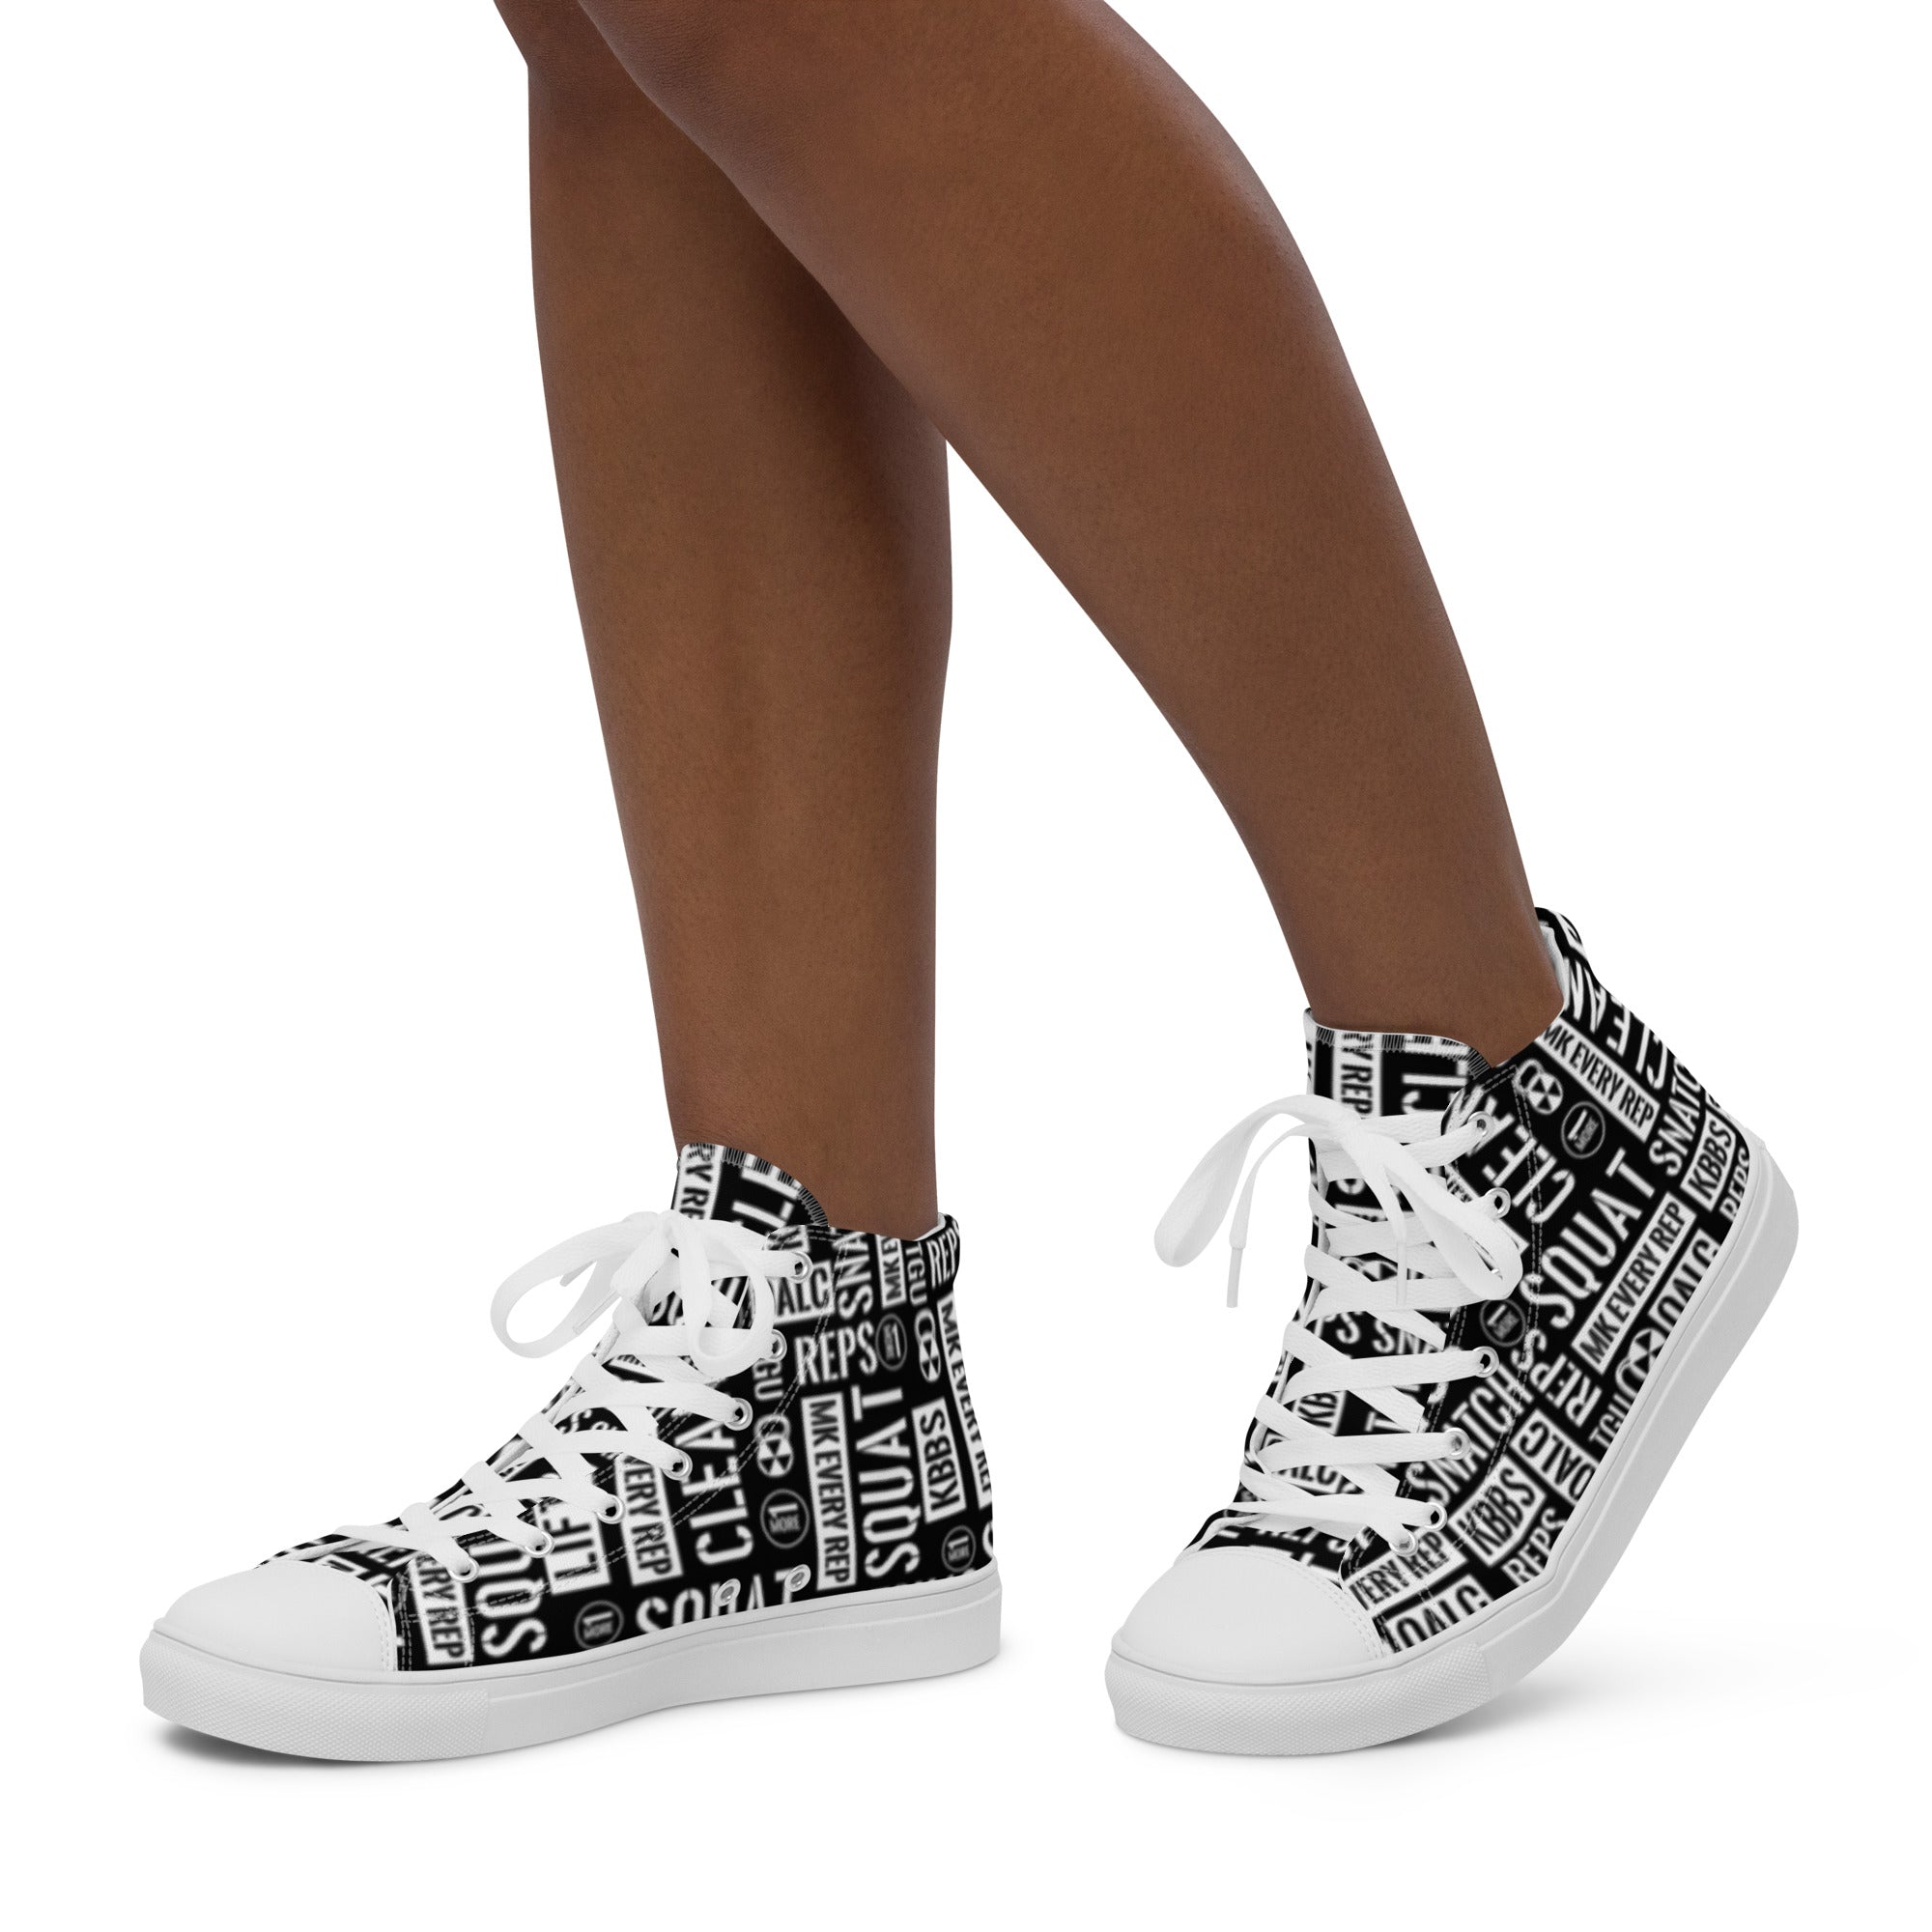 Women’s Black/White Acronyms High Top Canvas Shoes